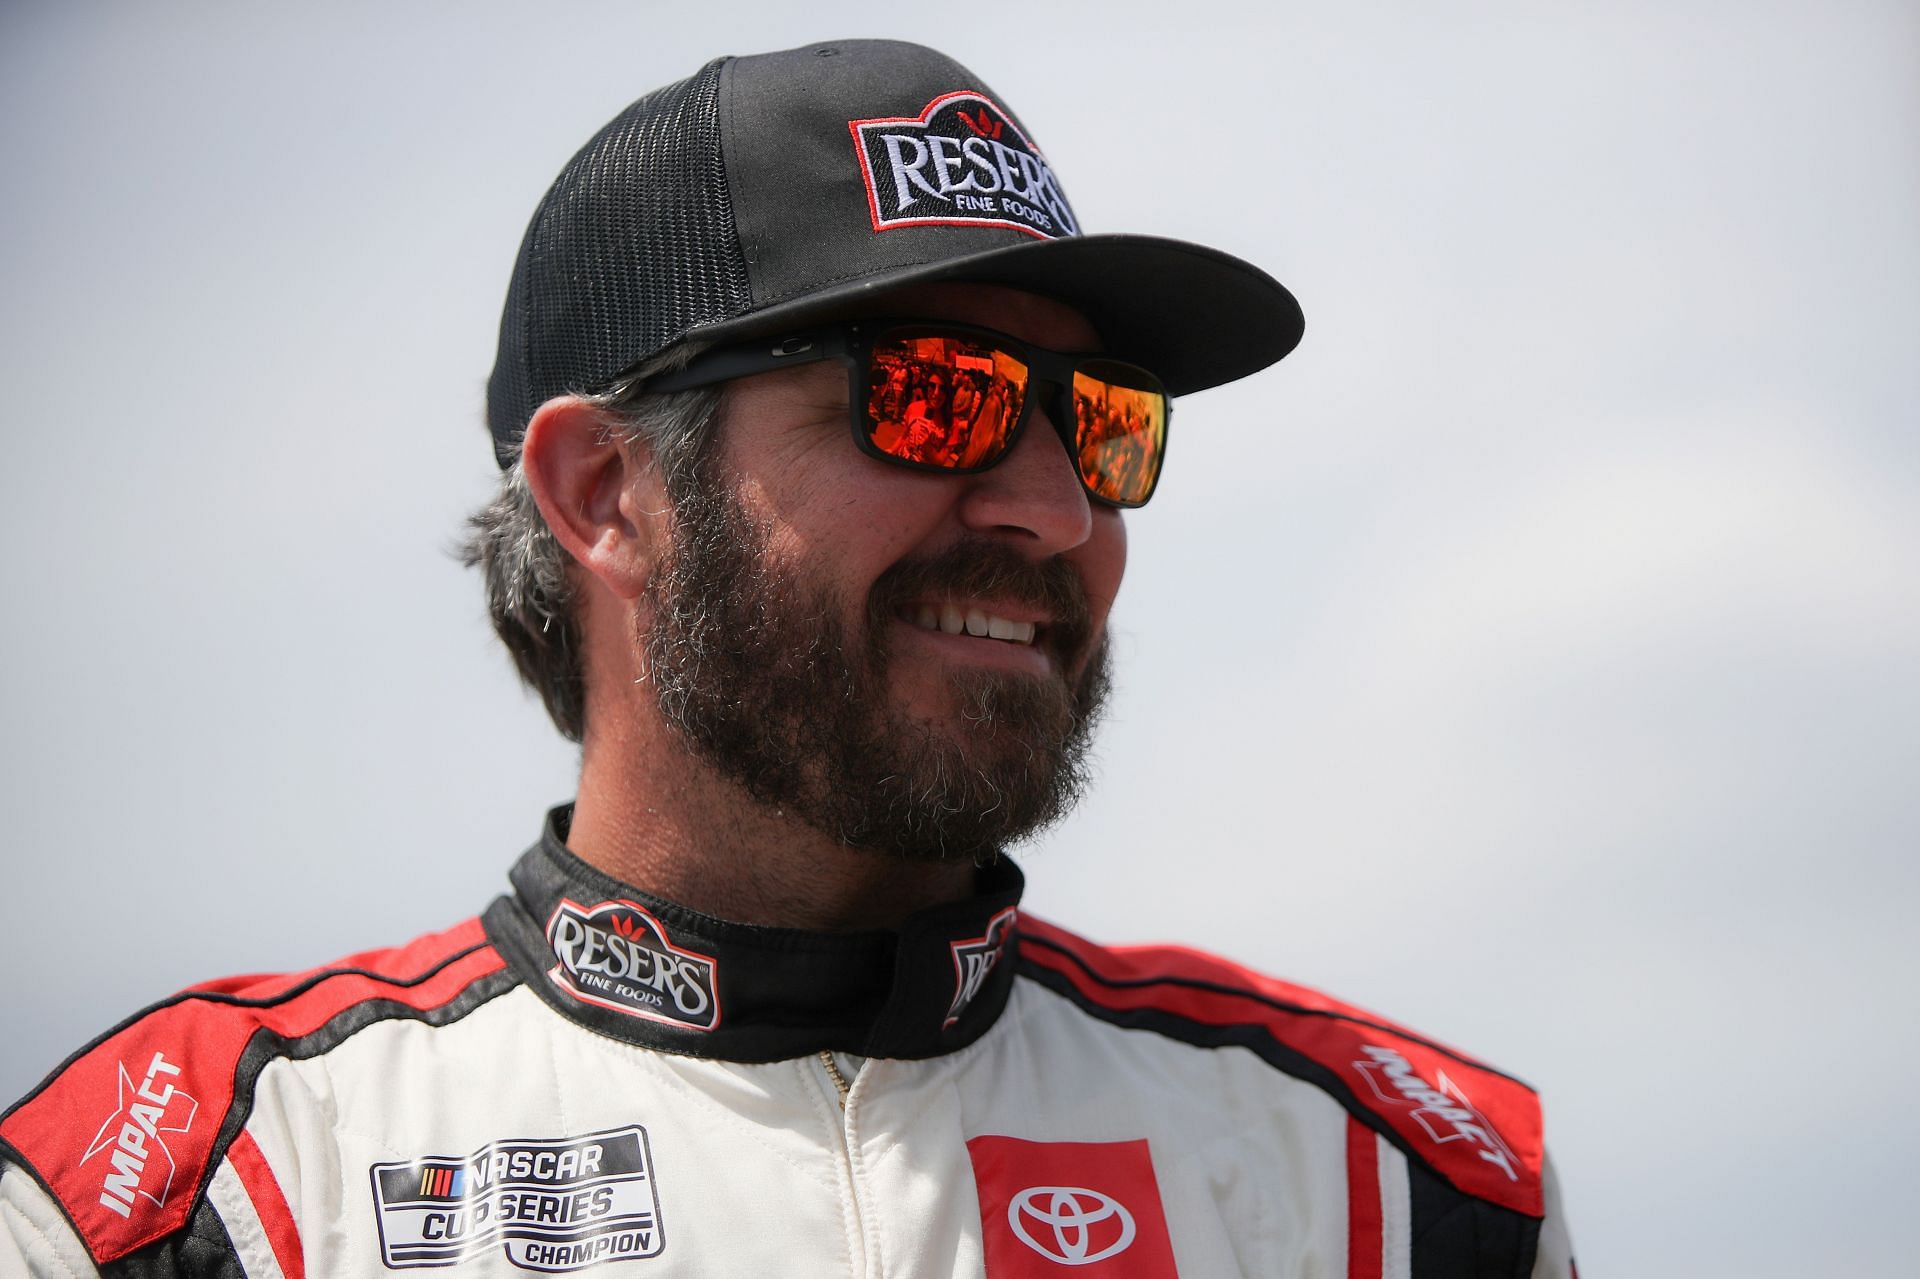 Martin Truex Jr. waits on the grid prior to the NASCAR Cup Series Enjoy Illinois 300 at WWT Raceway